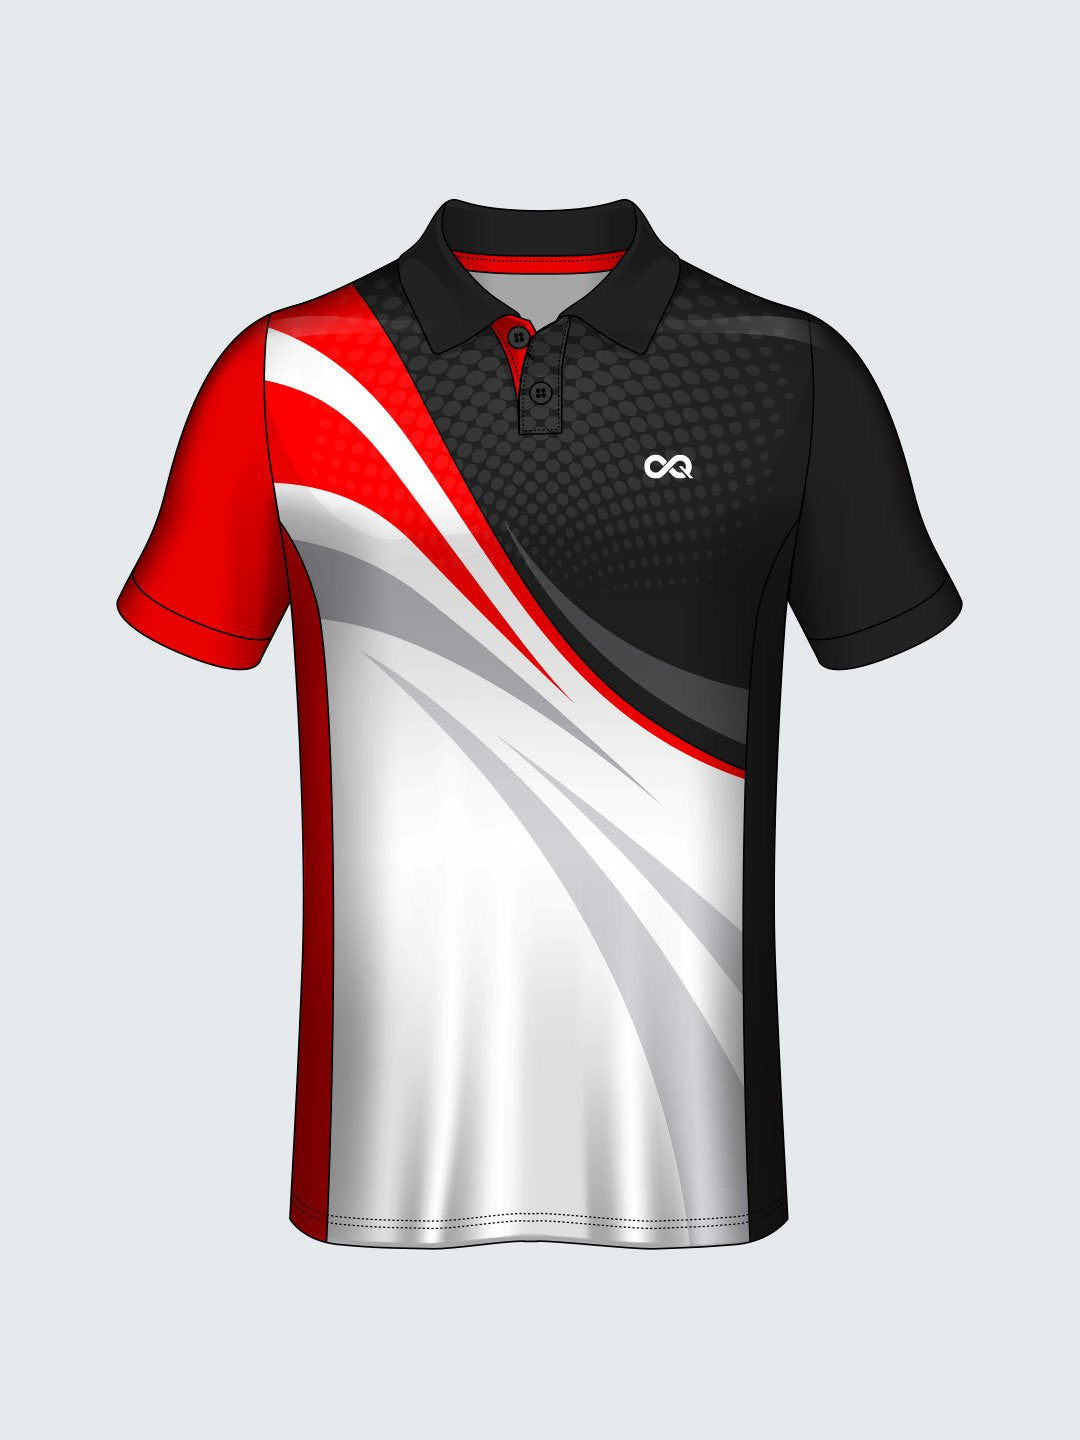 sports cricket jersey design your own